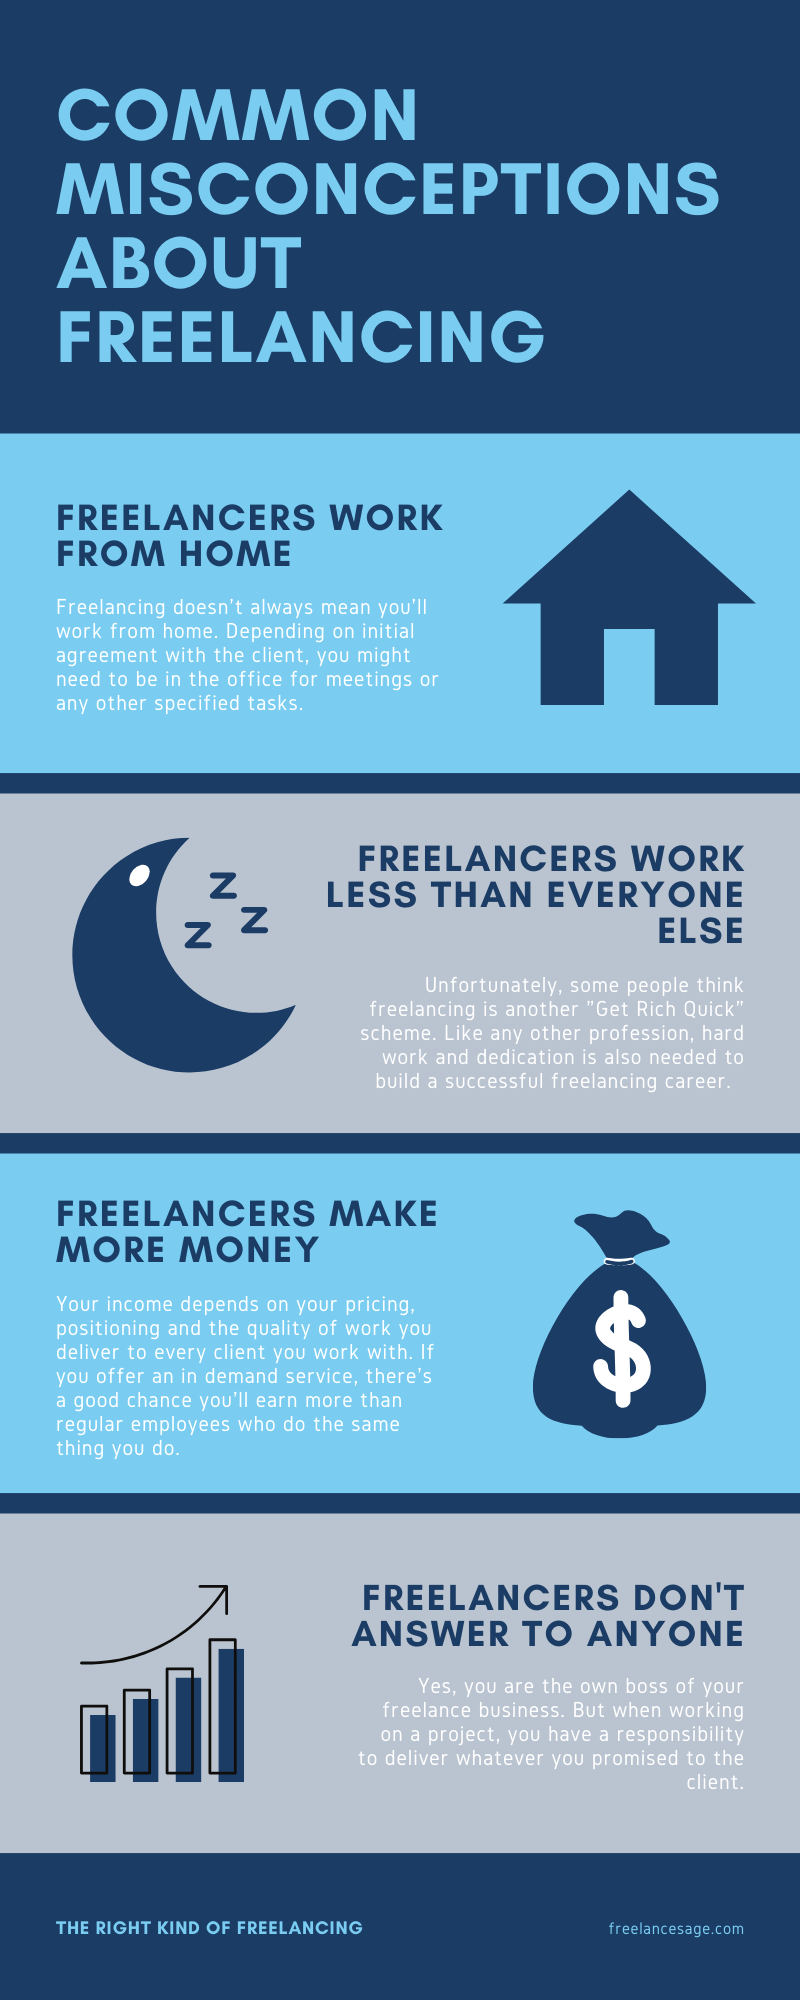 Common Misconceptions About Freelancing